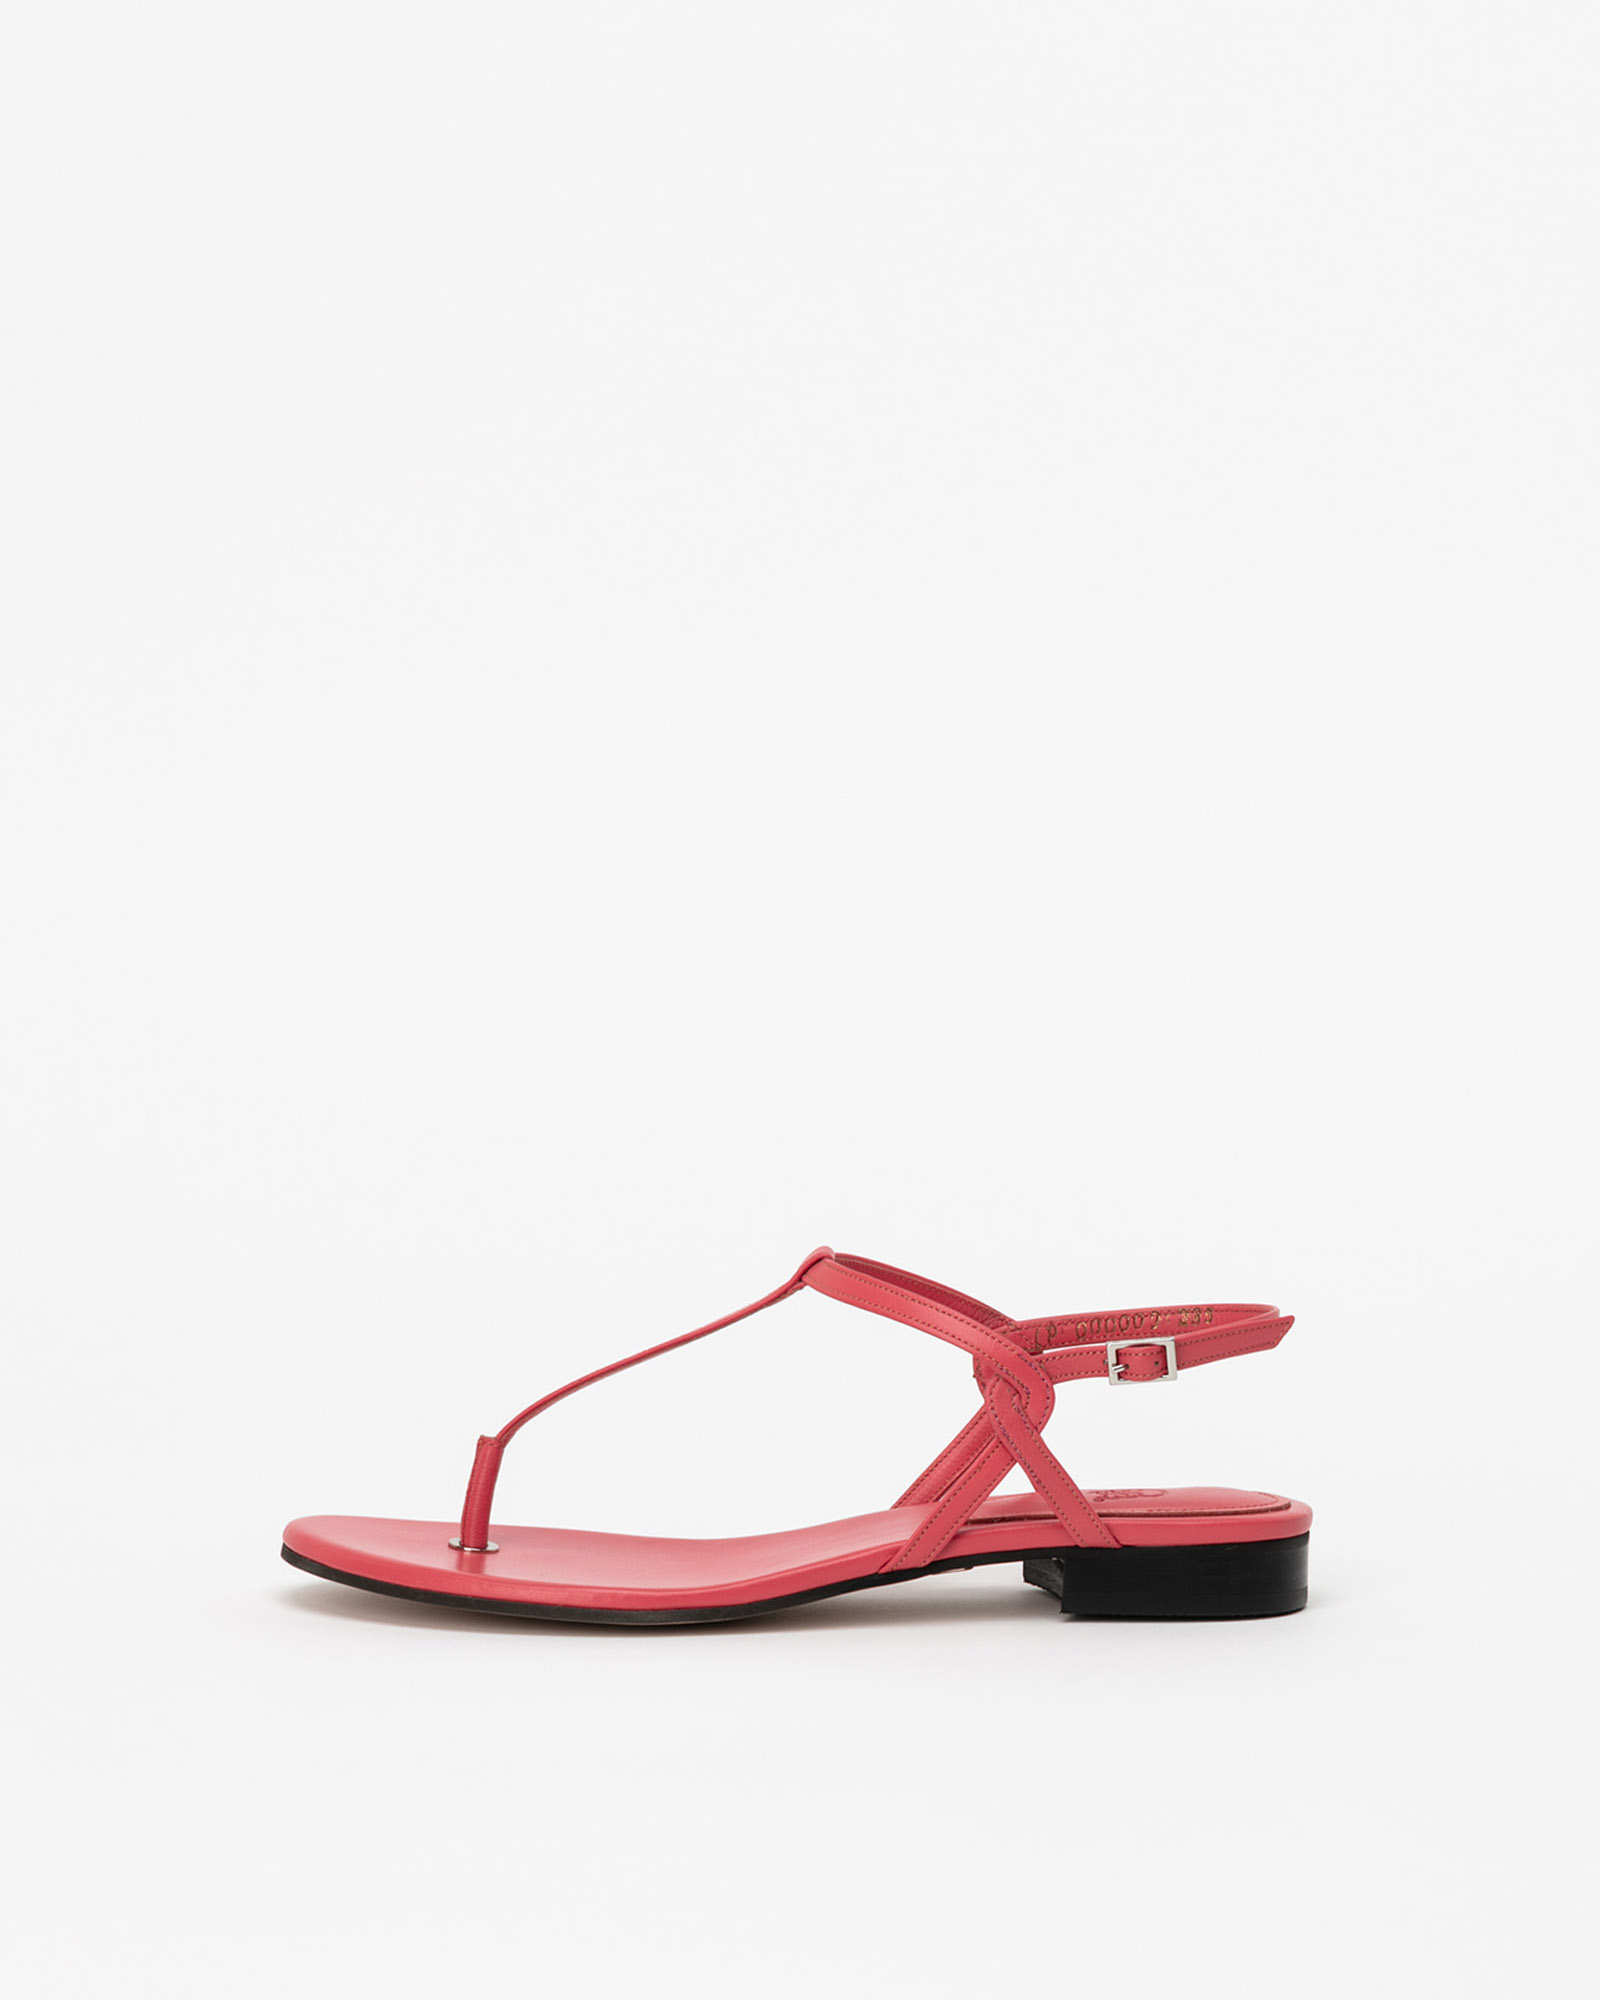 Panatica Thong Flat Sandals in Paradise Pink